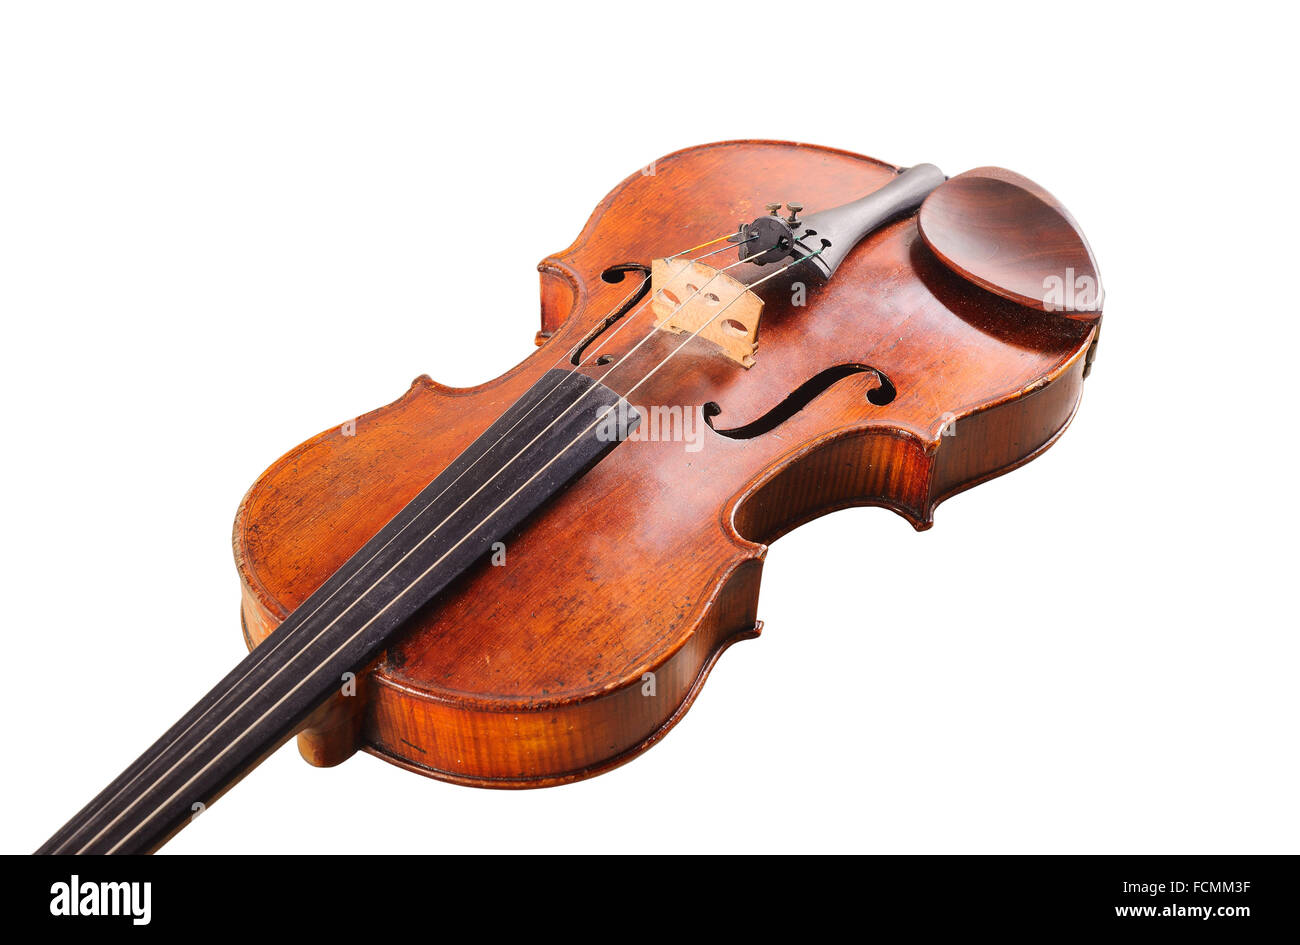 antique, arts, backgrounds, baroque, bow, brown, carpentry, character, classic, classical, concepts, concert, craft, culture, cu Stock Photo